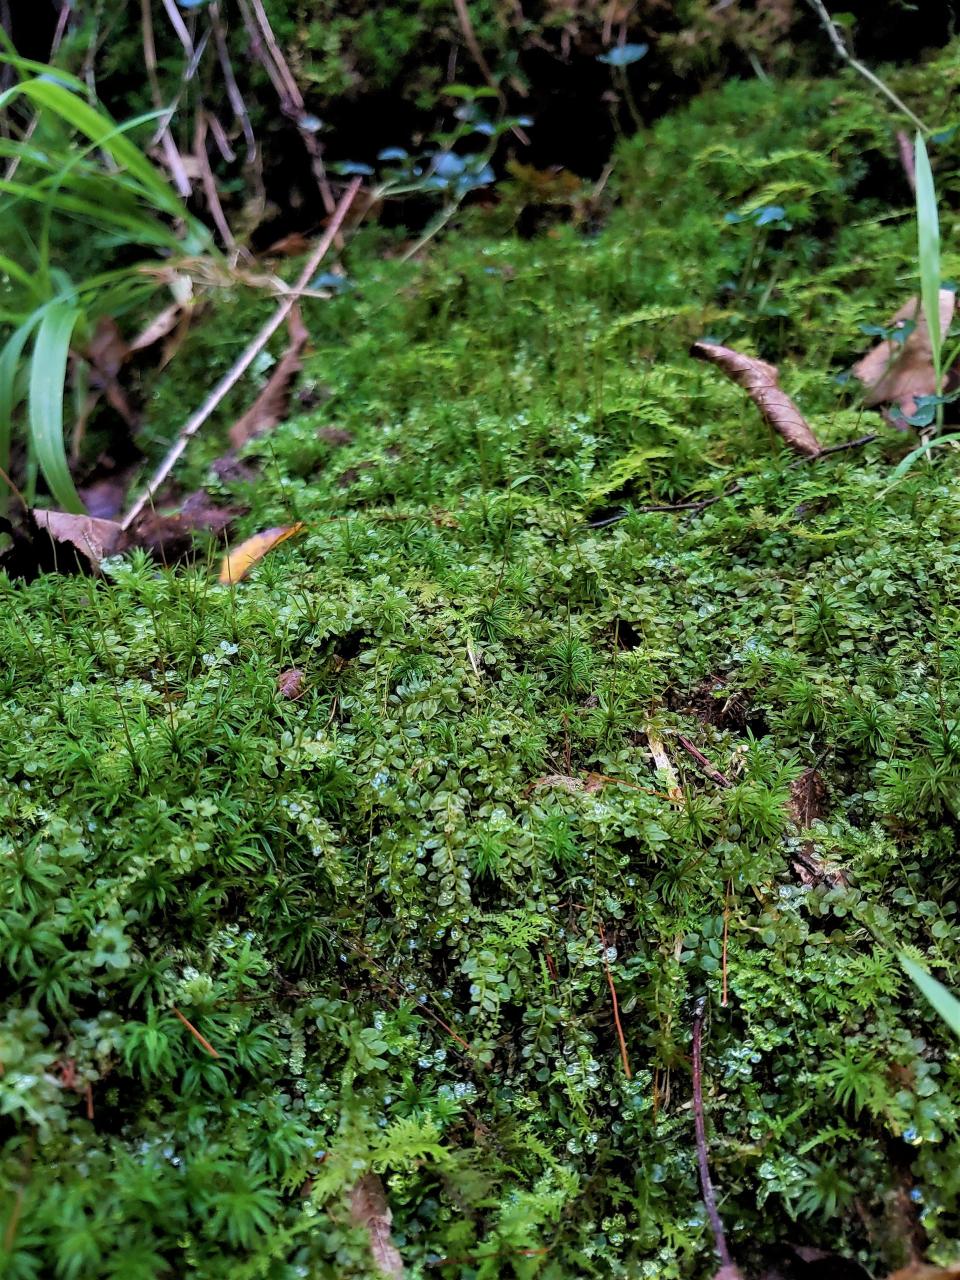 The texture of saber-tooth moss (Plagiomnium ciliare) enhances that of the mosses around it. Mosses can commonly be seen cohabitating with other species – it would be easy to mistake P. ciliare for a vascular plant with its large leaves and creeping growth.